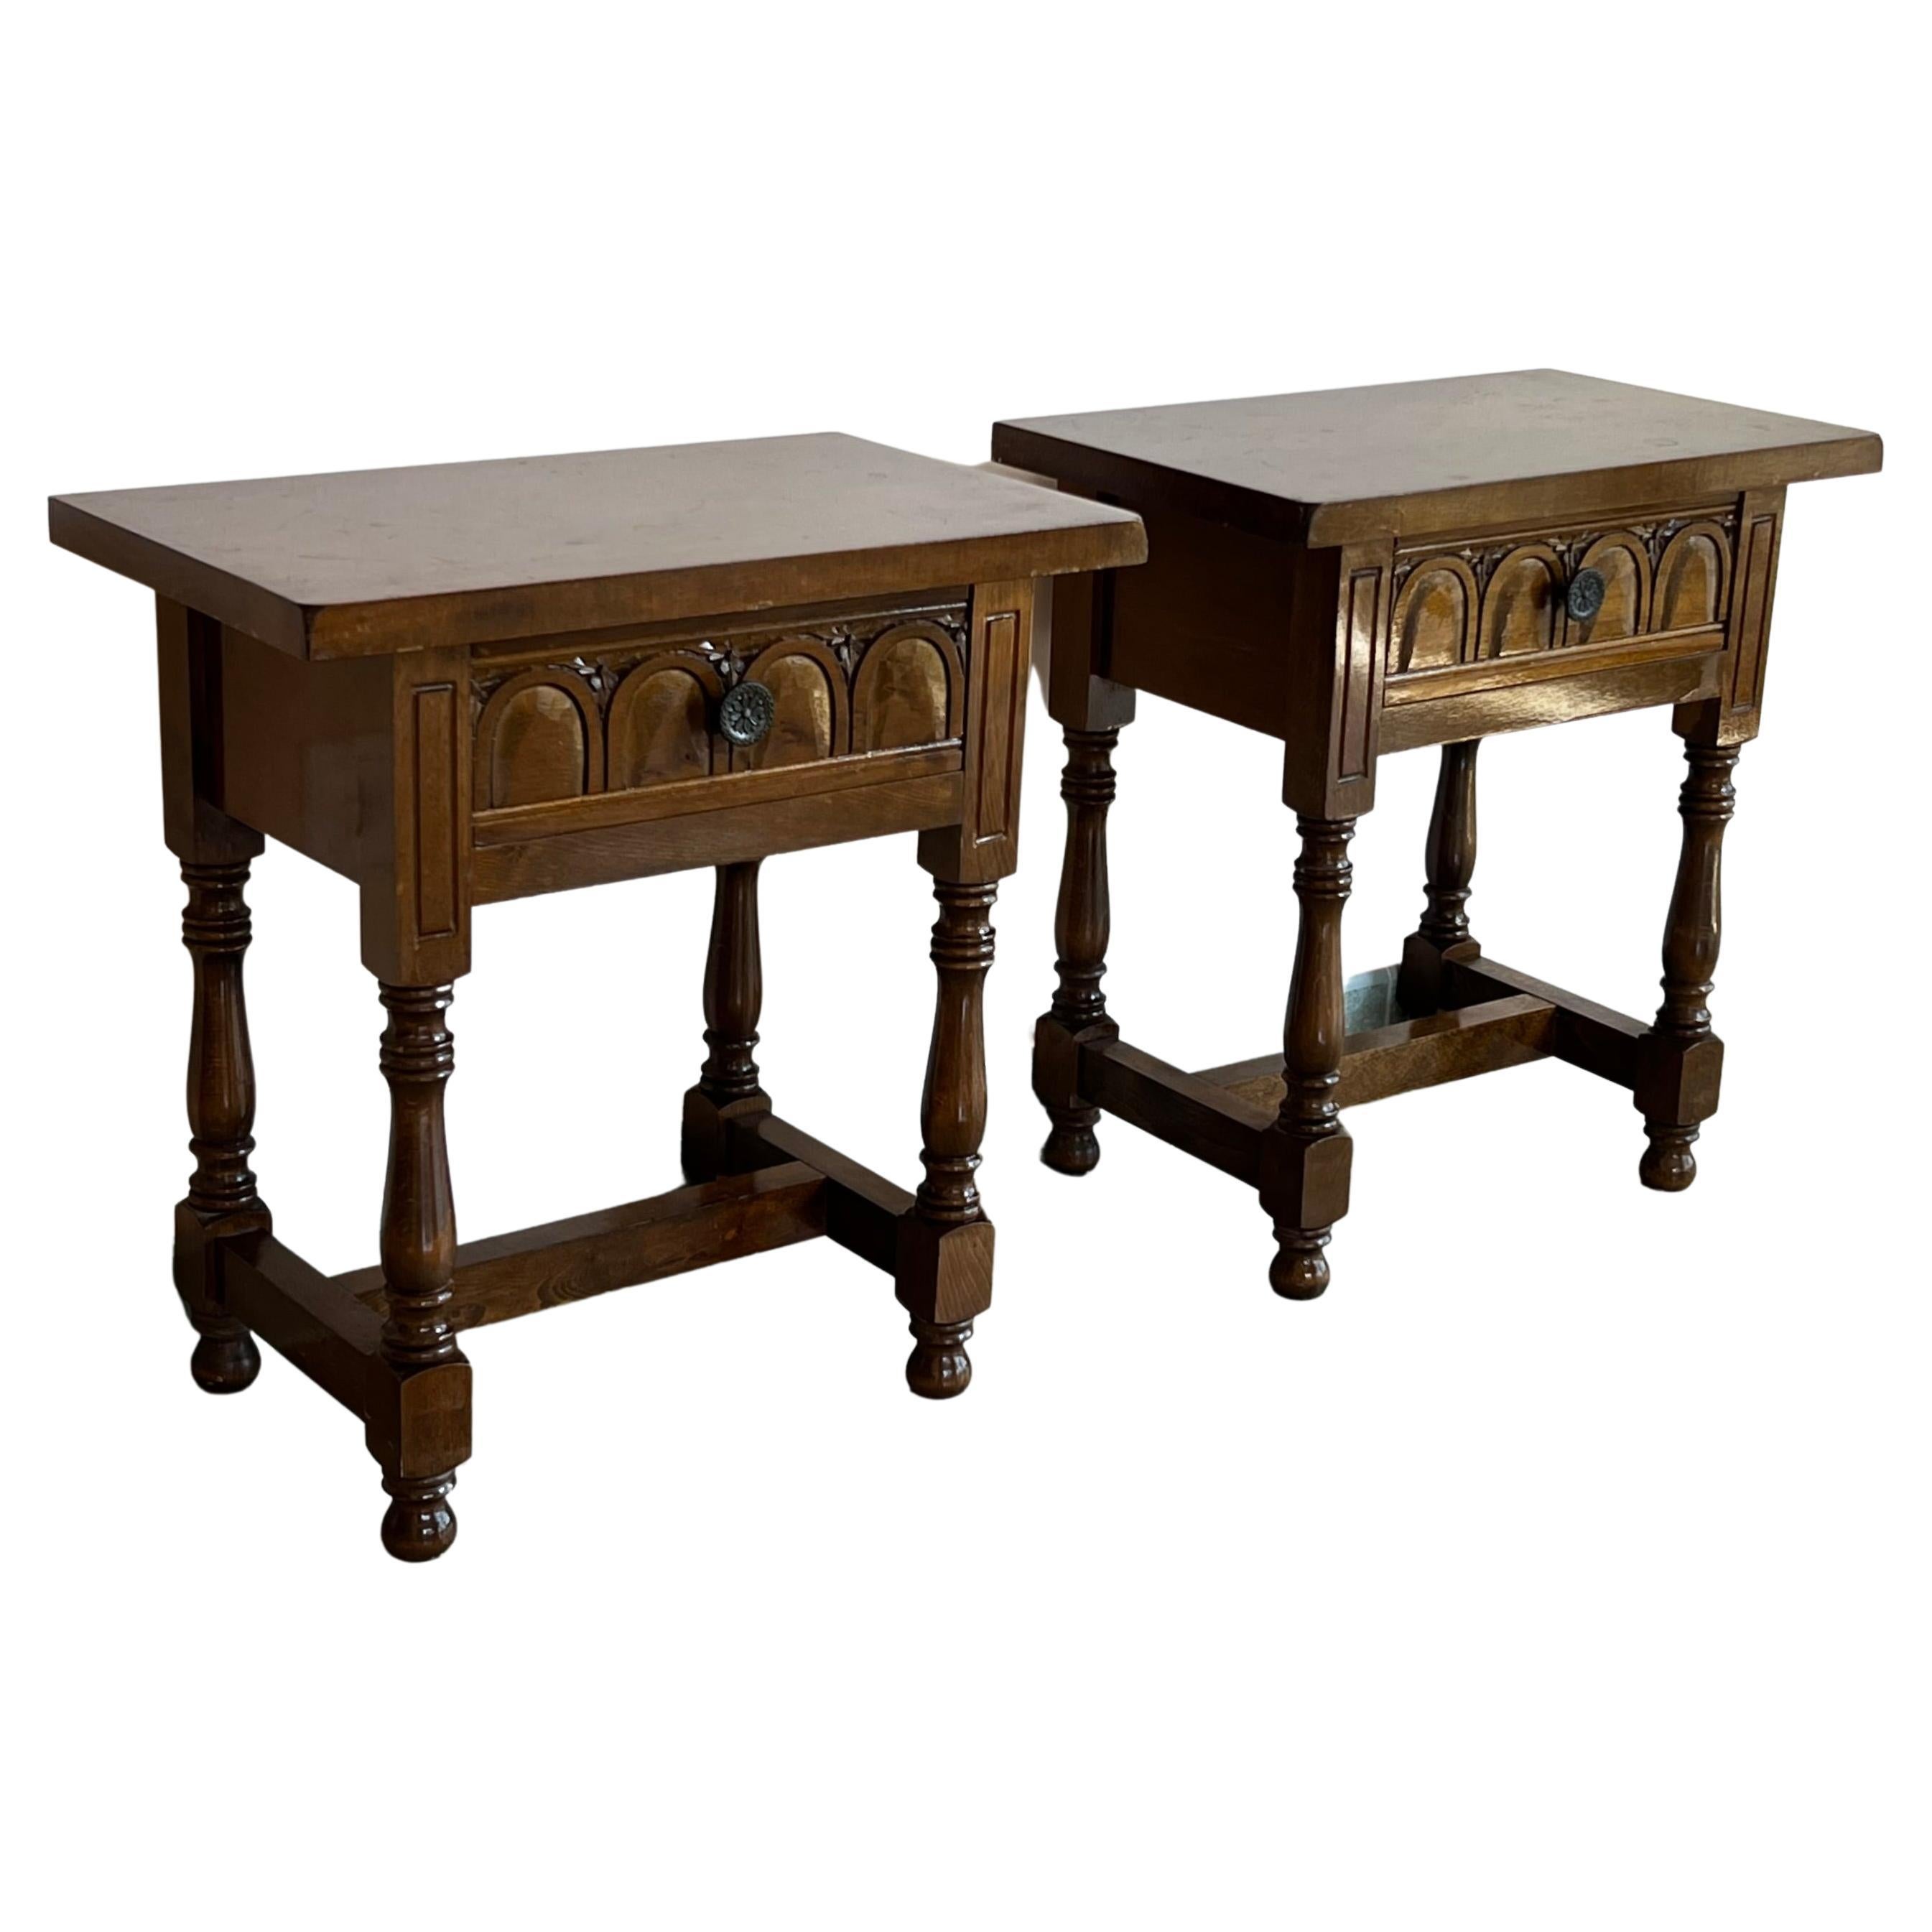 20th Century Pair of Spanish Nightstands with Drawer and Iron Hardware